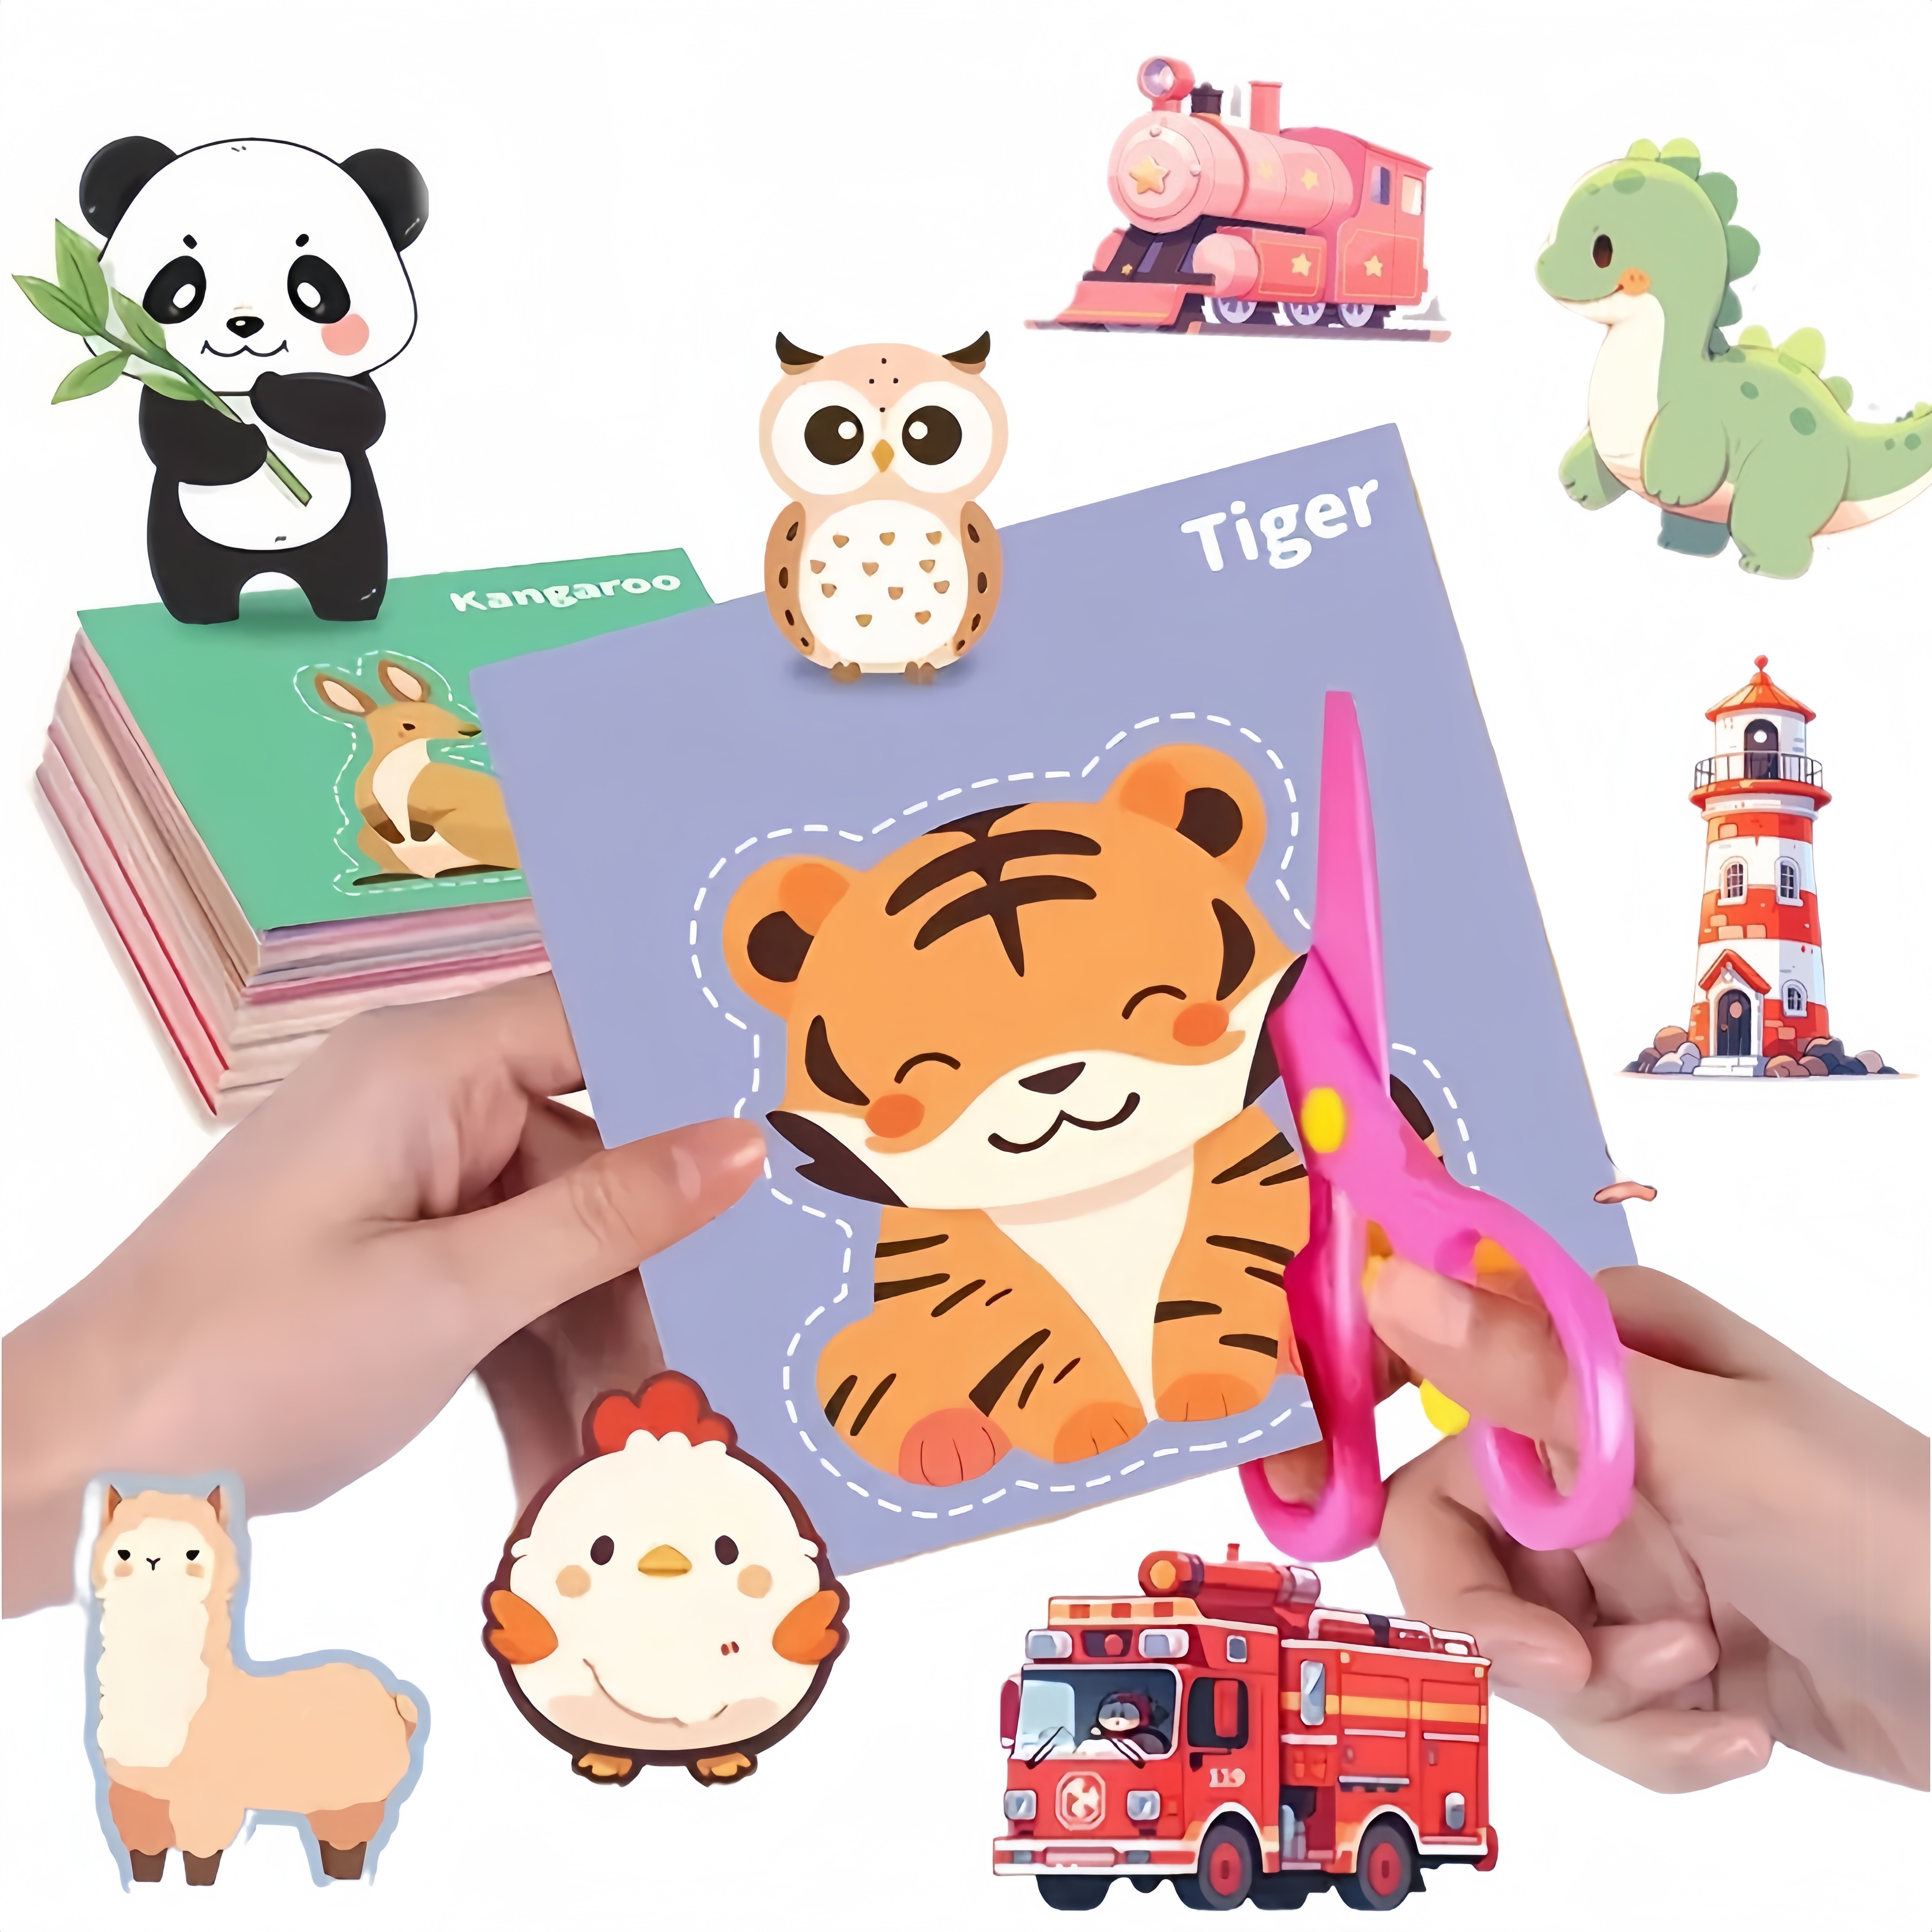 

120 Sheets Kids Scissor Skills Activity Set - Mixed Color Paper Cutting Art Crafts Kit, Diy Decoupage Paper-cutting Children's Educational Handmade Material, Featuring Animals, Fruits, Vehicles & More